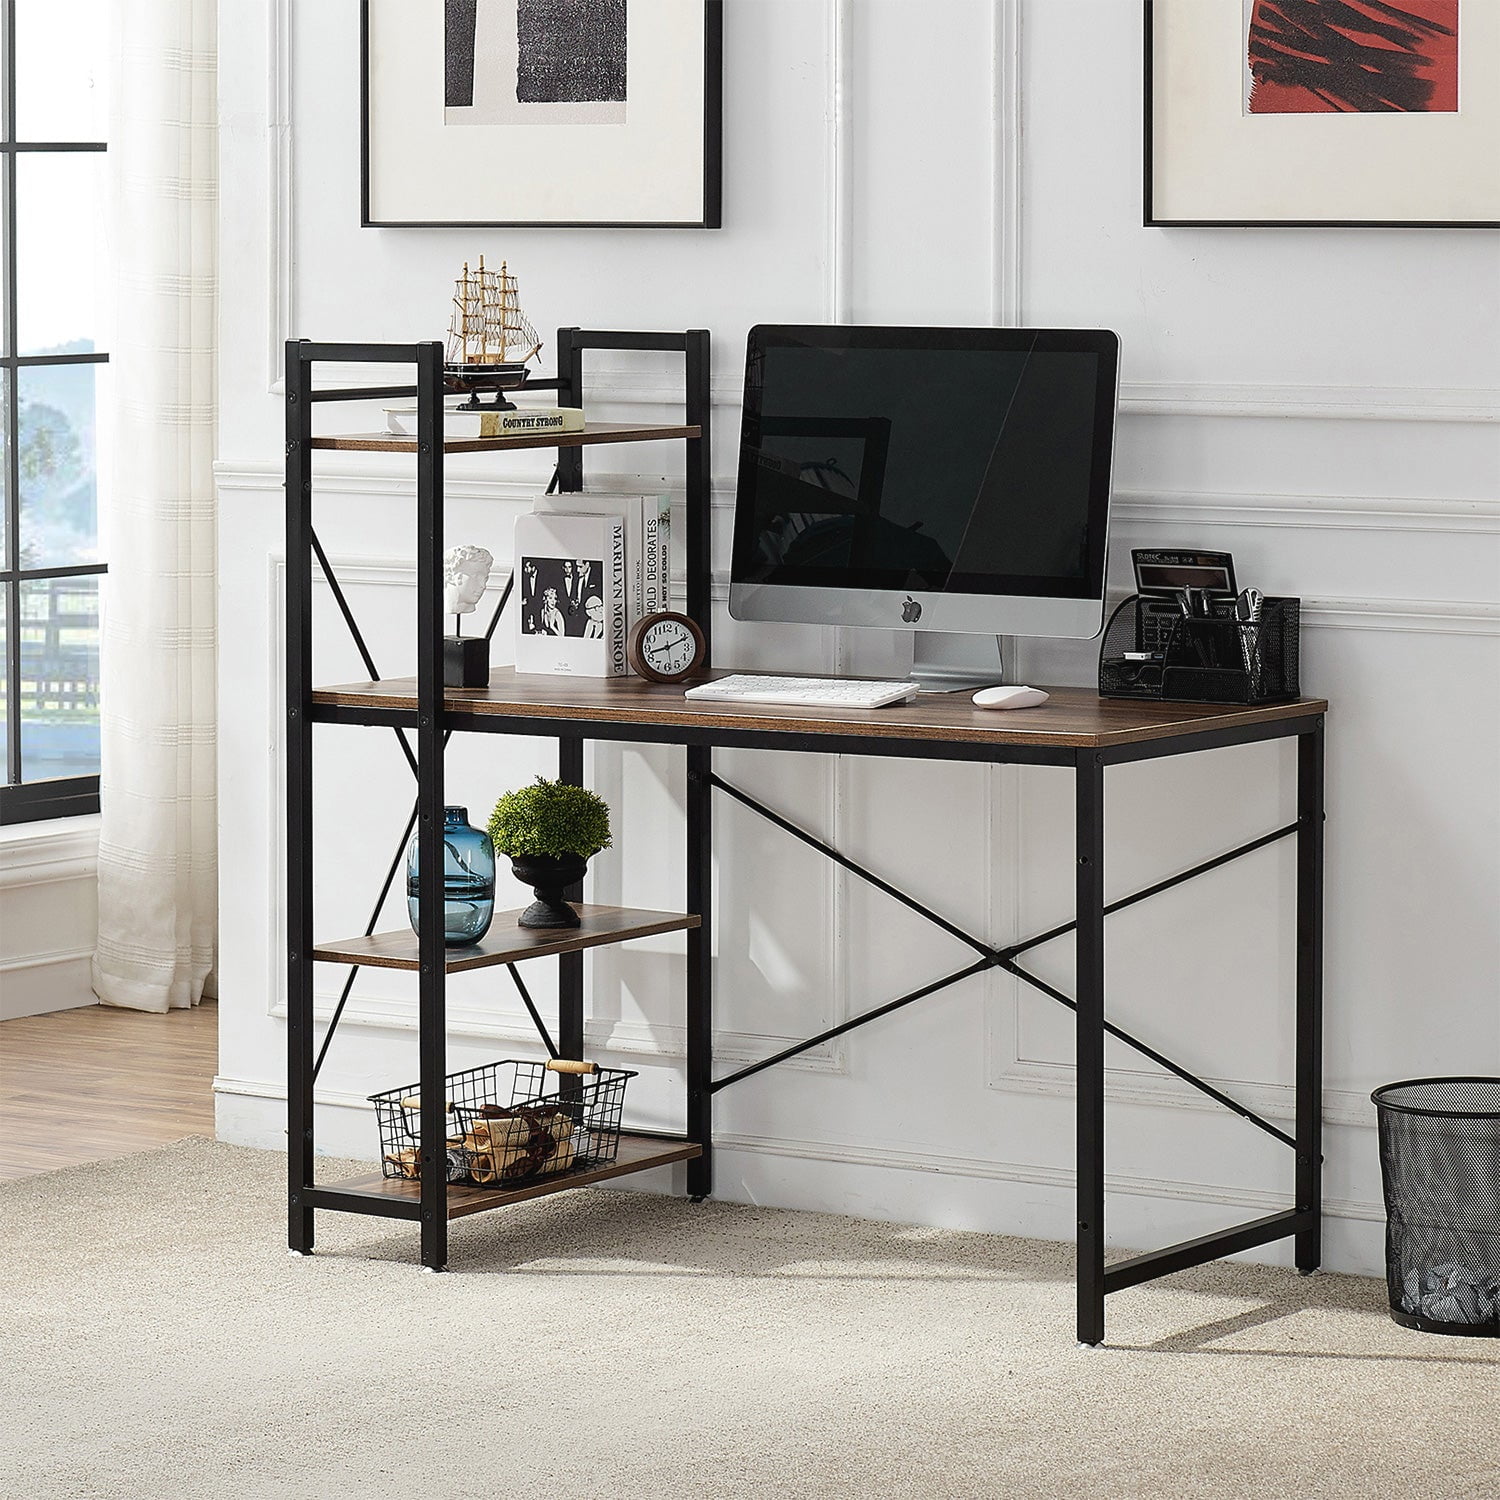 Details about   59" Rustic Office Desk Computer Studying Writing Table w/4-Tier Storage Shelves 